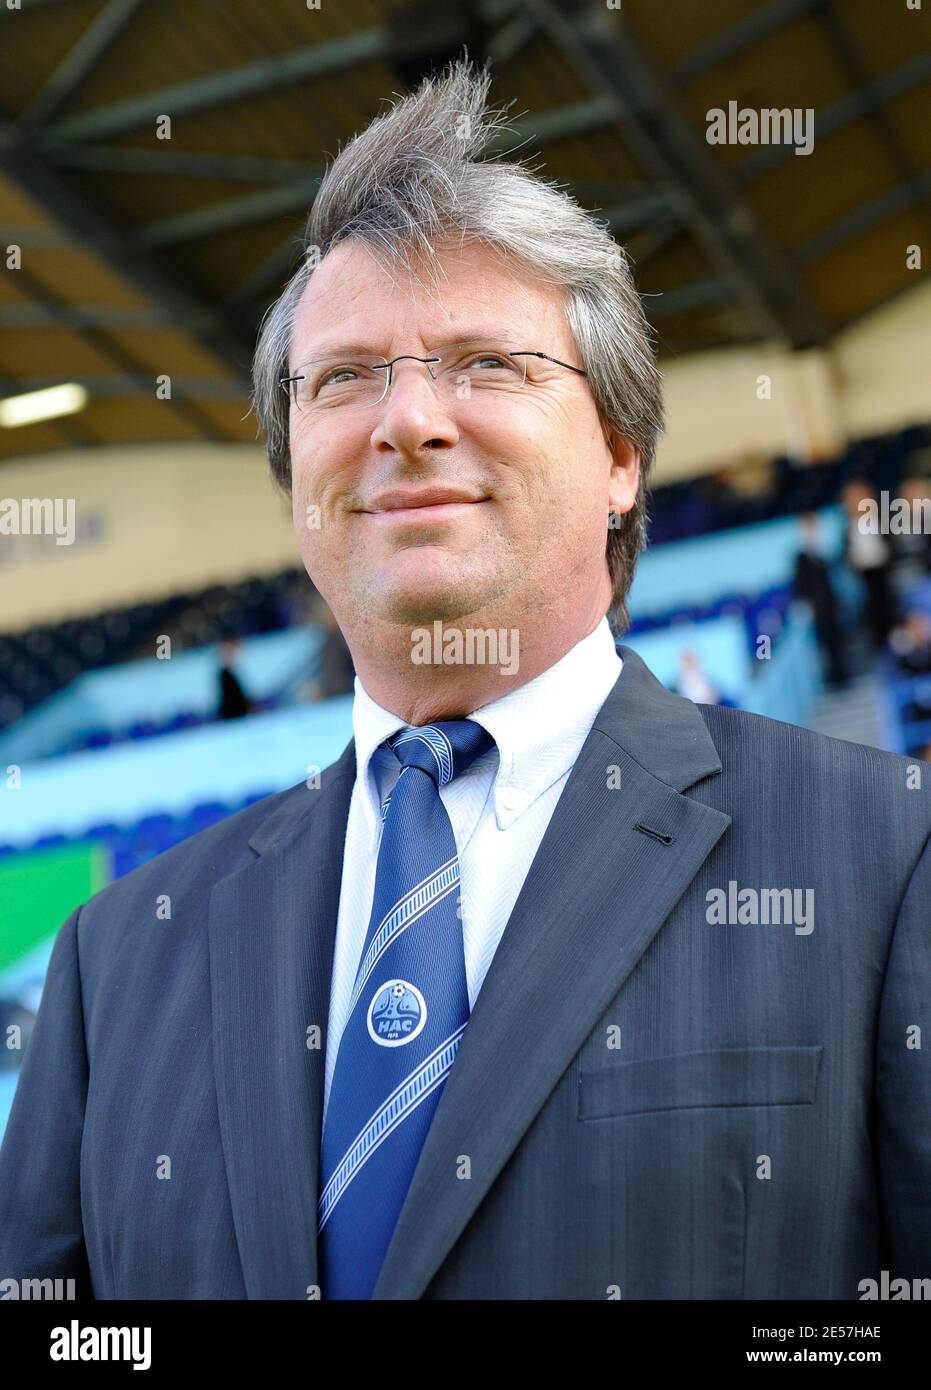 Jean-Marc Nobilo, coach of Le Havre during the French First League soccer  match, Le Havre vs Lyon, in Le Havre, France, on September 20, 2008. Lyon  won 1-0. Photo by Willis Parker/Cameleon/ABACAPRESS.COM